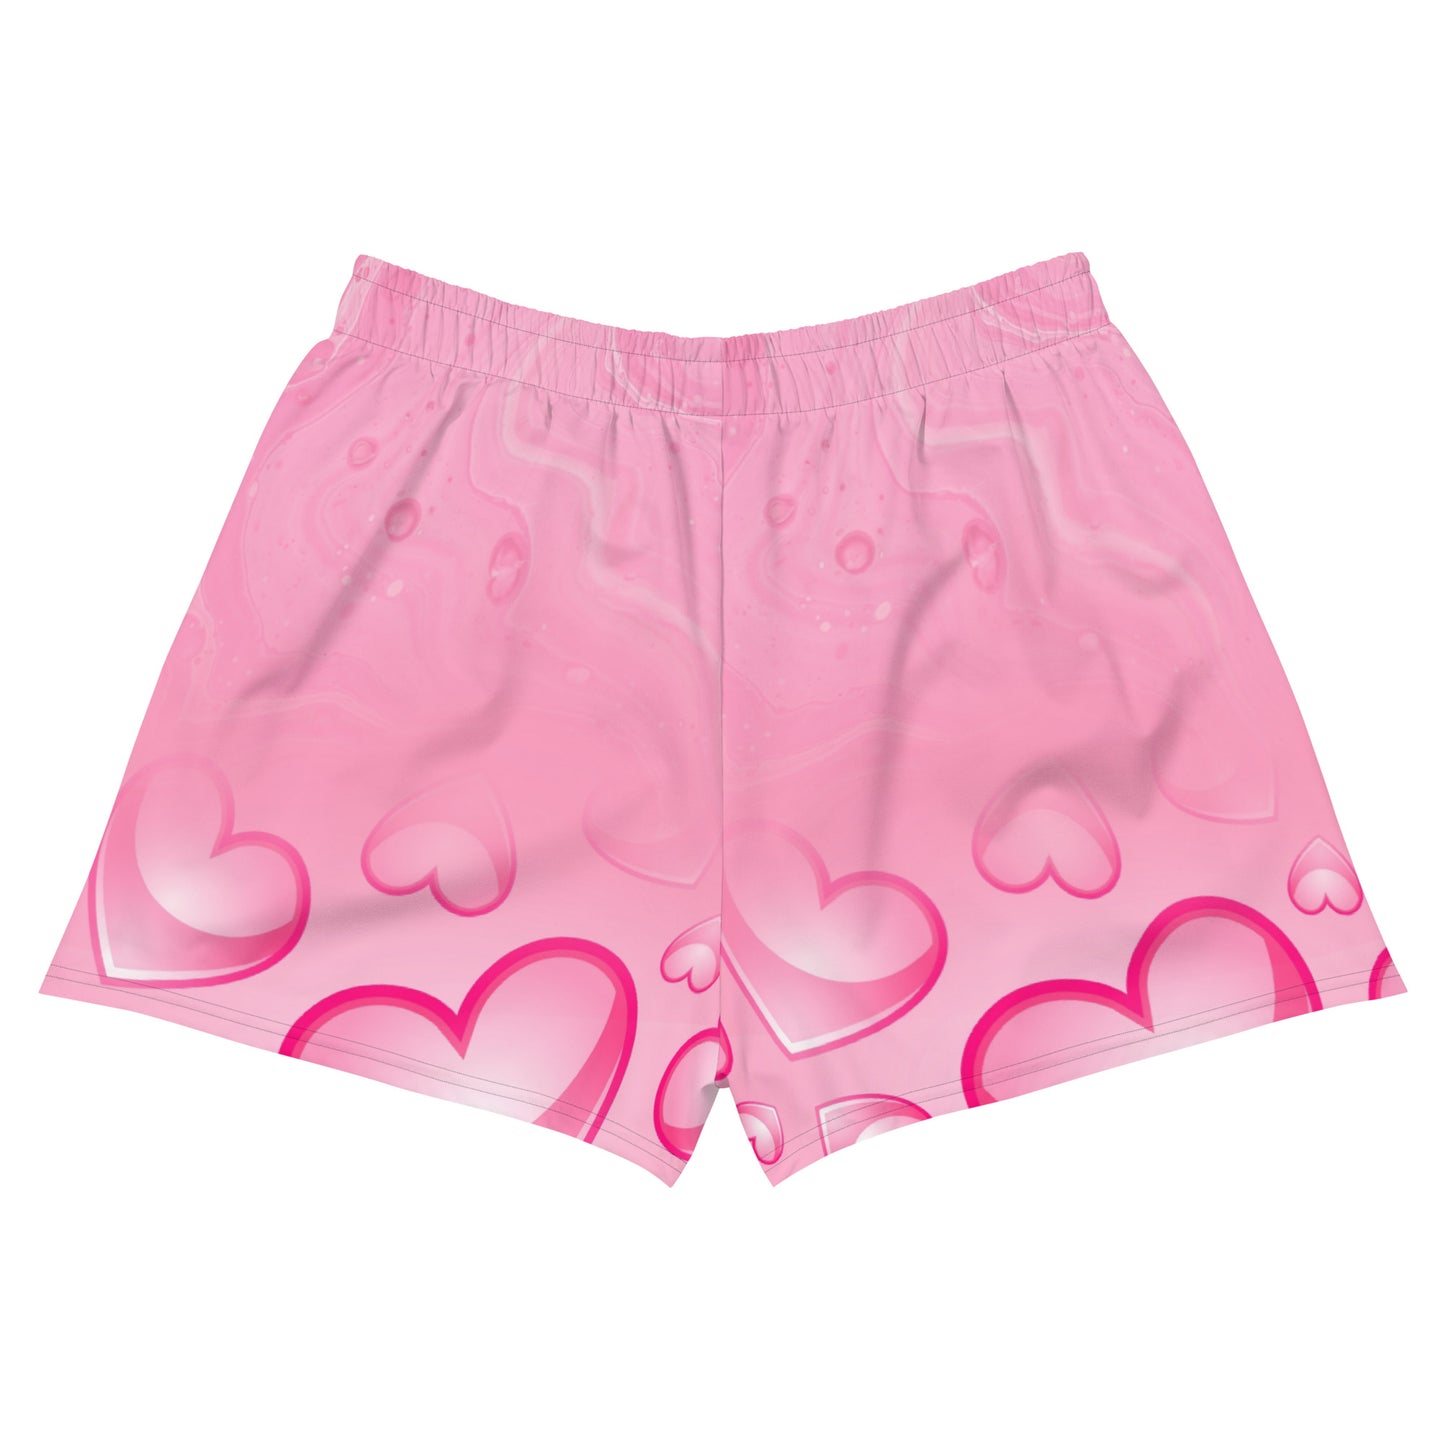 WOMENS PINK LOVE ATHLETIC SHORTS